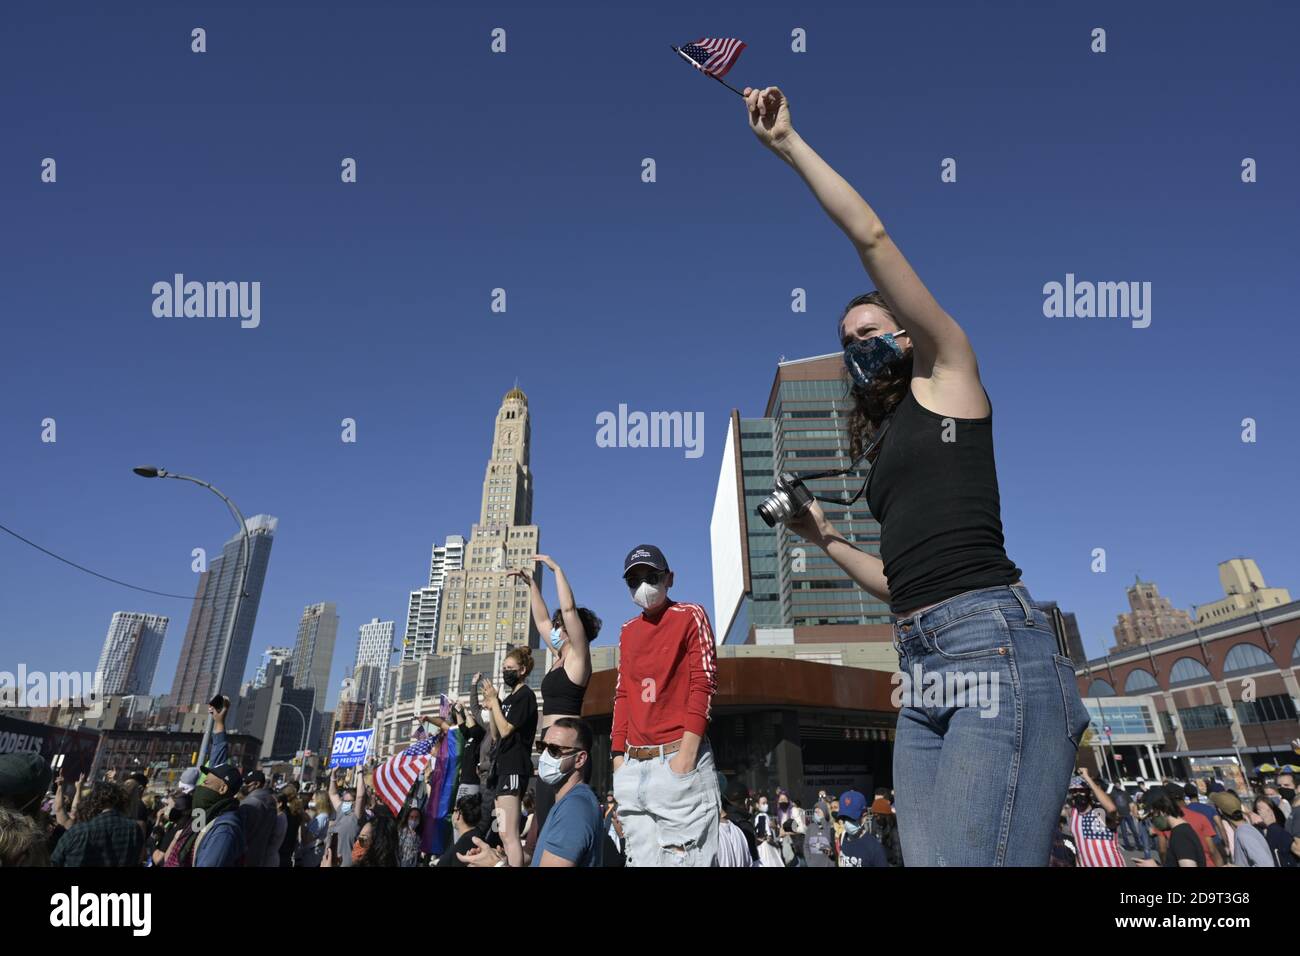 Brooklyn, New York, USA Nov 7th 2020.  A young woman standing on a pylon waves a U.S. flag as people gather outside Barclays Center to celebrate Joe Biden's projected victory in U.S. presidential race Stock Photo